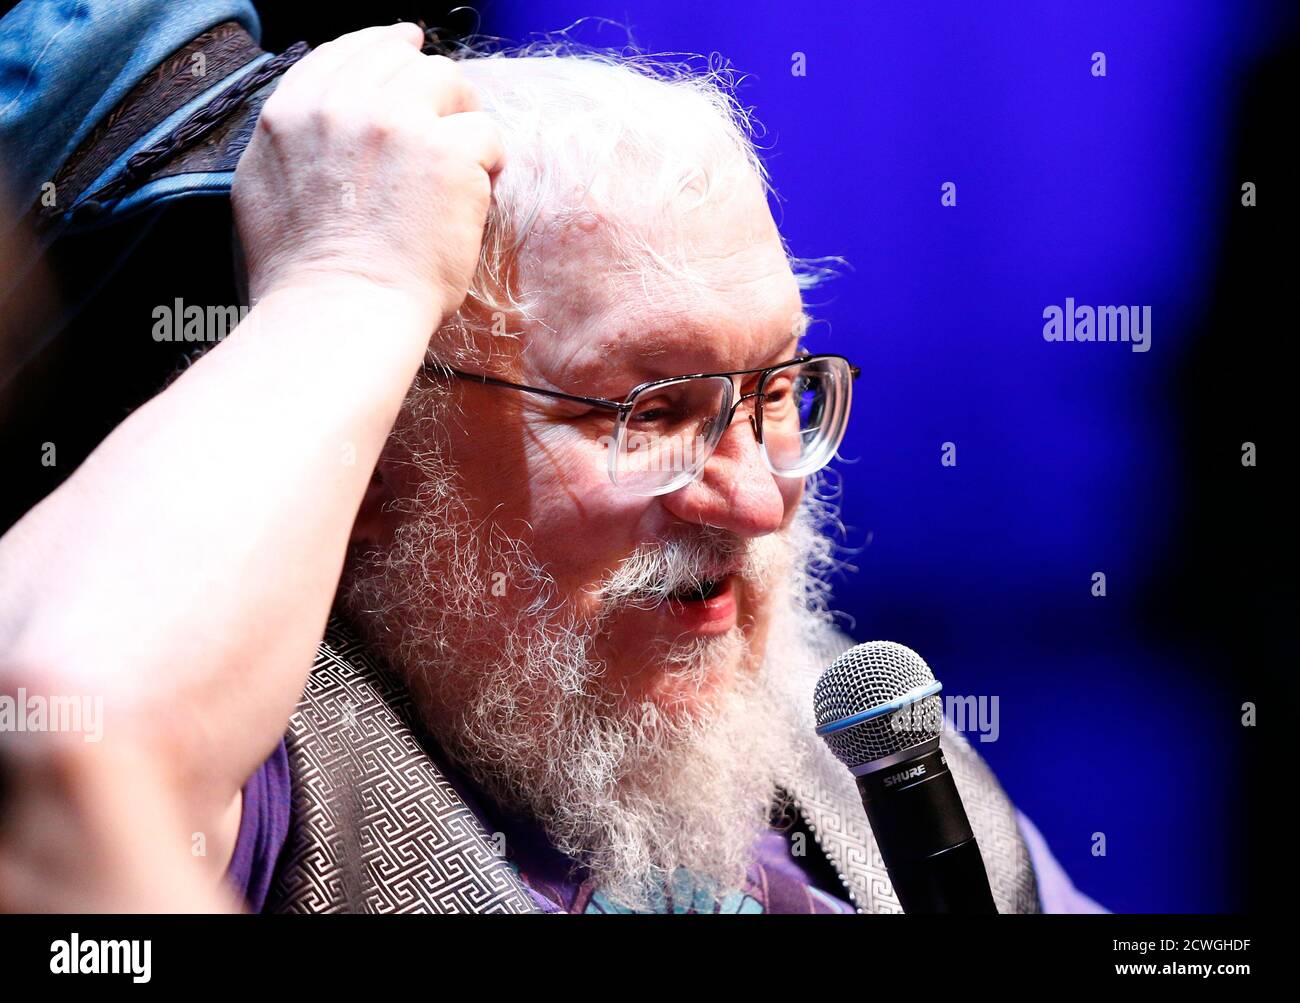 George R.R. Martin, author of the "Song of Ice and Fire" fantasy series  that is the basis of the television series "Game of Thrones", gestures  during his masterclass at the Neuchatel International